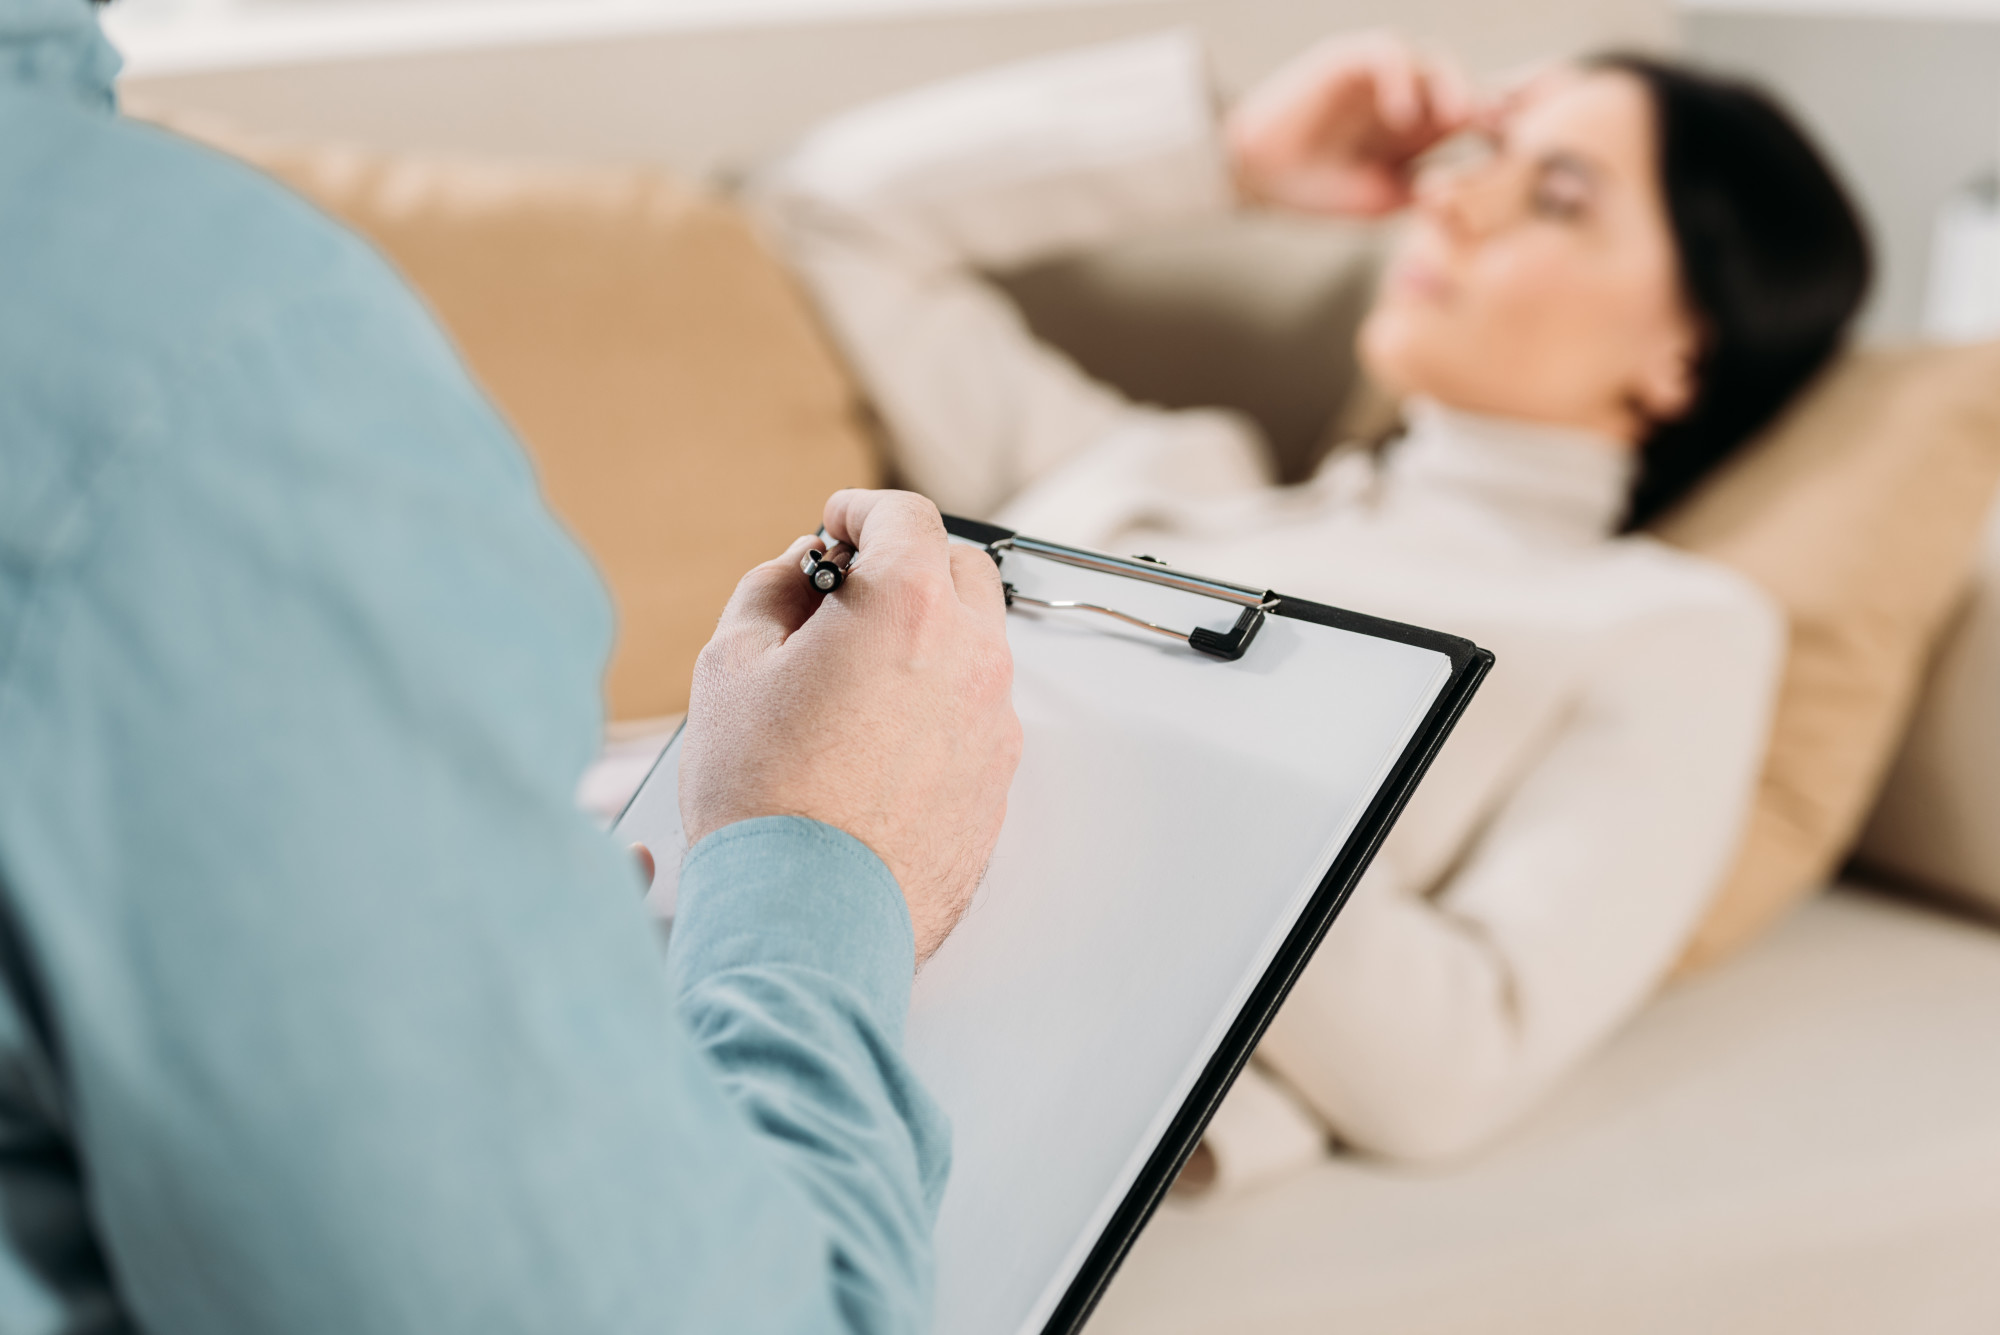 The field of psychotherapy is rapidly growing with new innovations and methods. Learn about the different types of psychotherapies here.